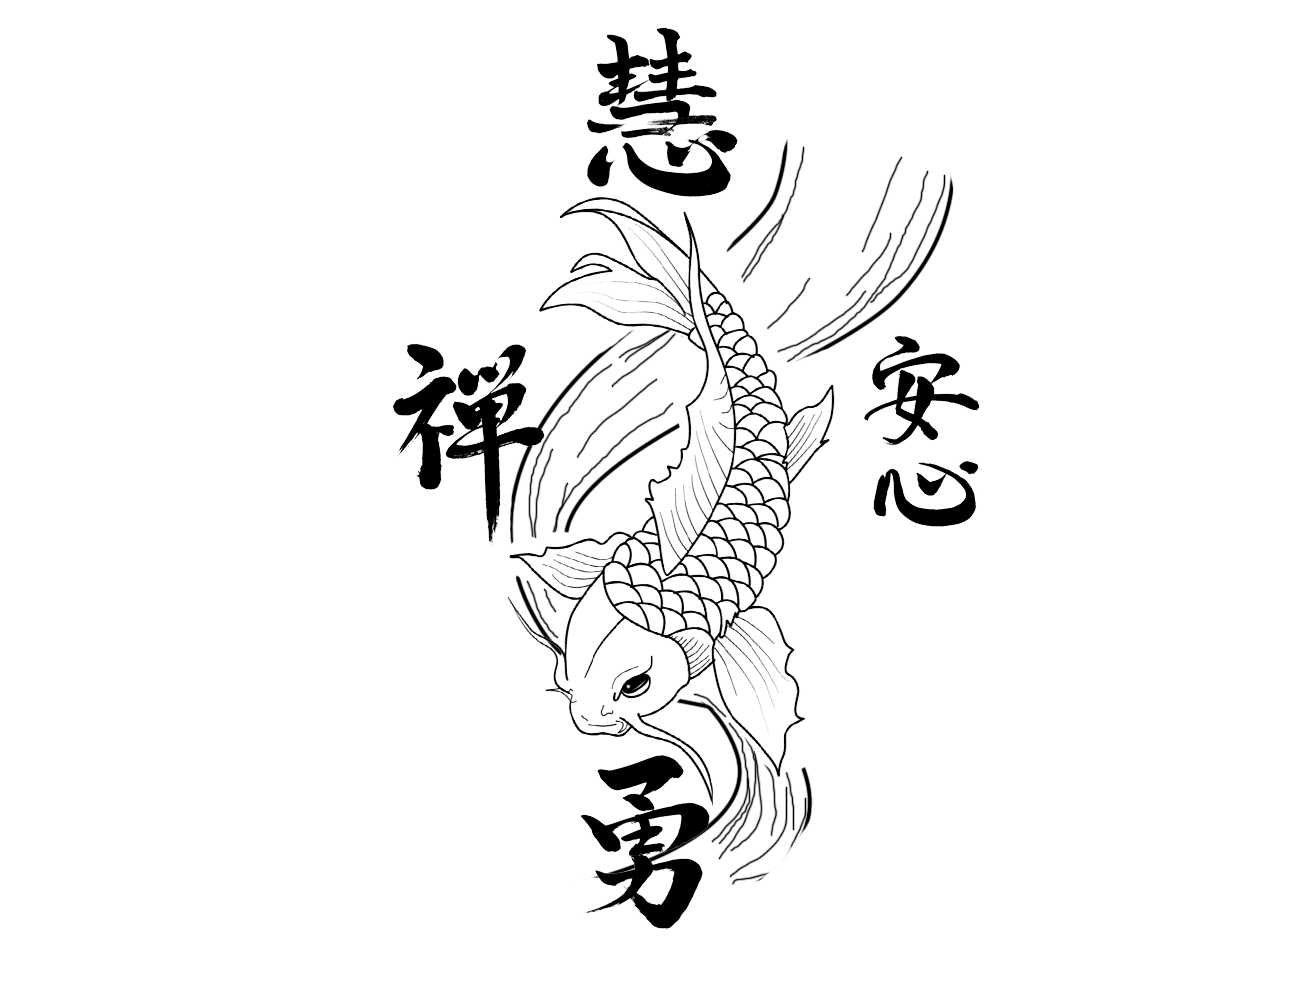 We Also Present Some Koi Fish Tattoo Designs For You In The Picture